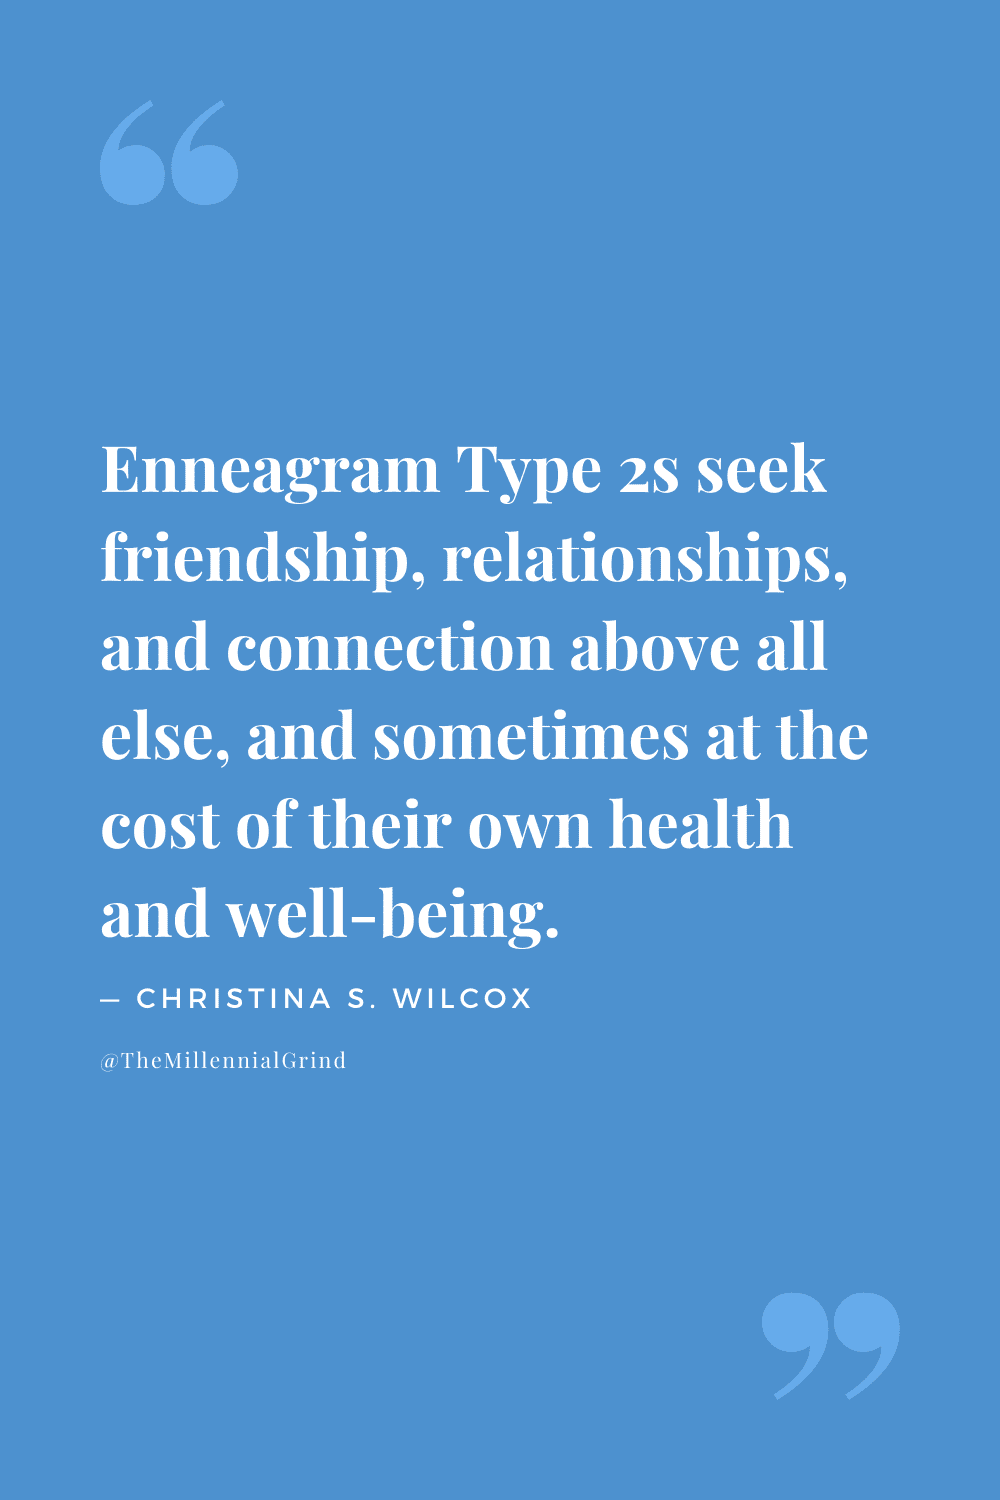 Quotes From Take Care of Your Type by Christina S. Wilcox